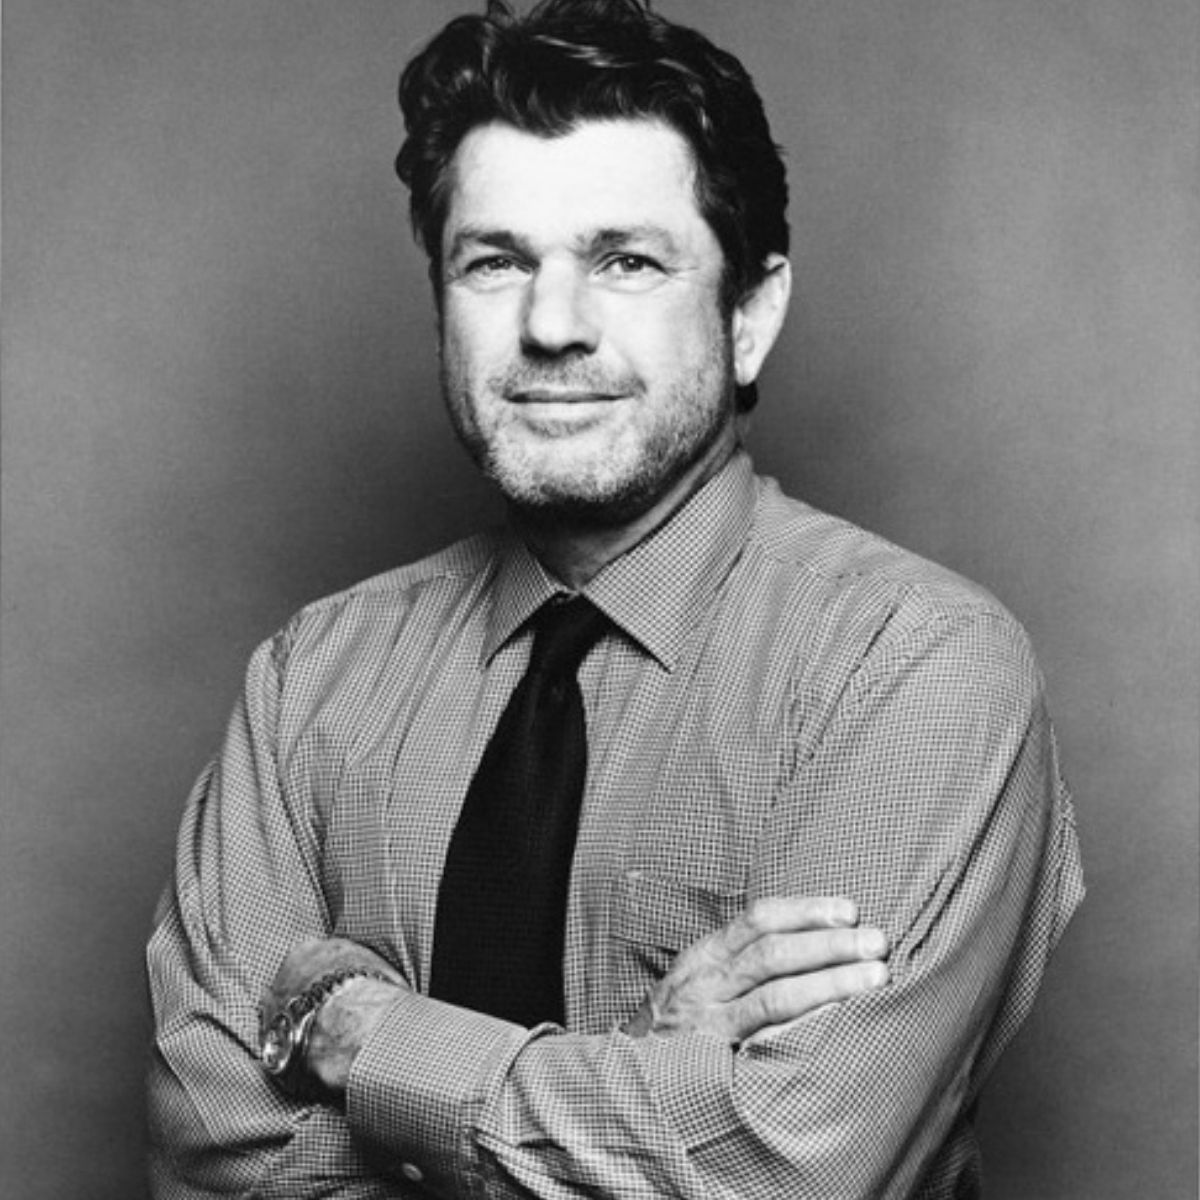 Jann Wenner, one of the main creators of the Rock and Roll Hall of Fame